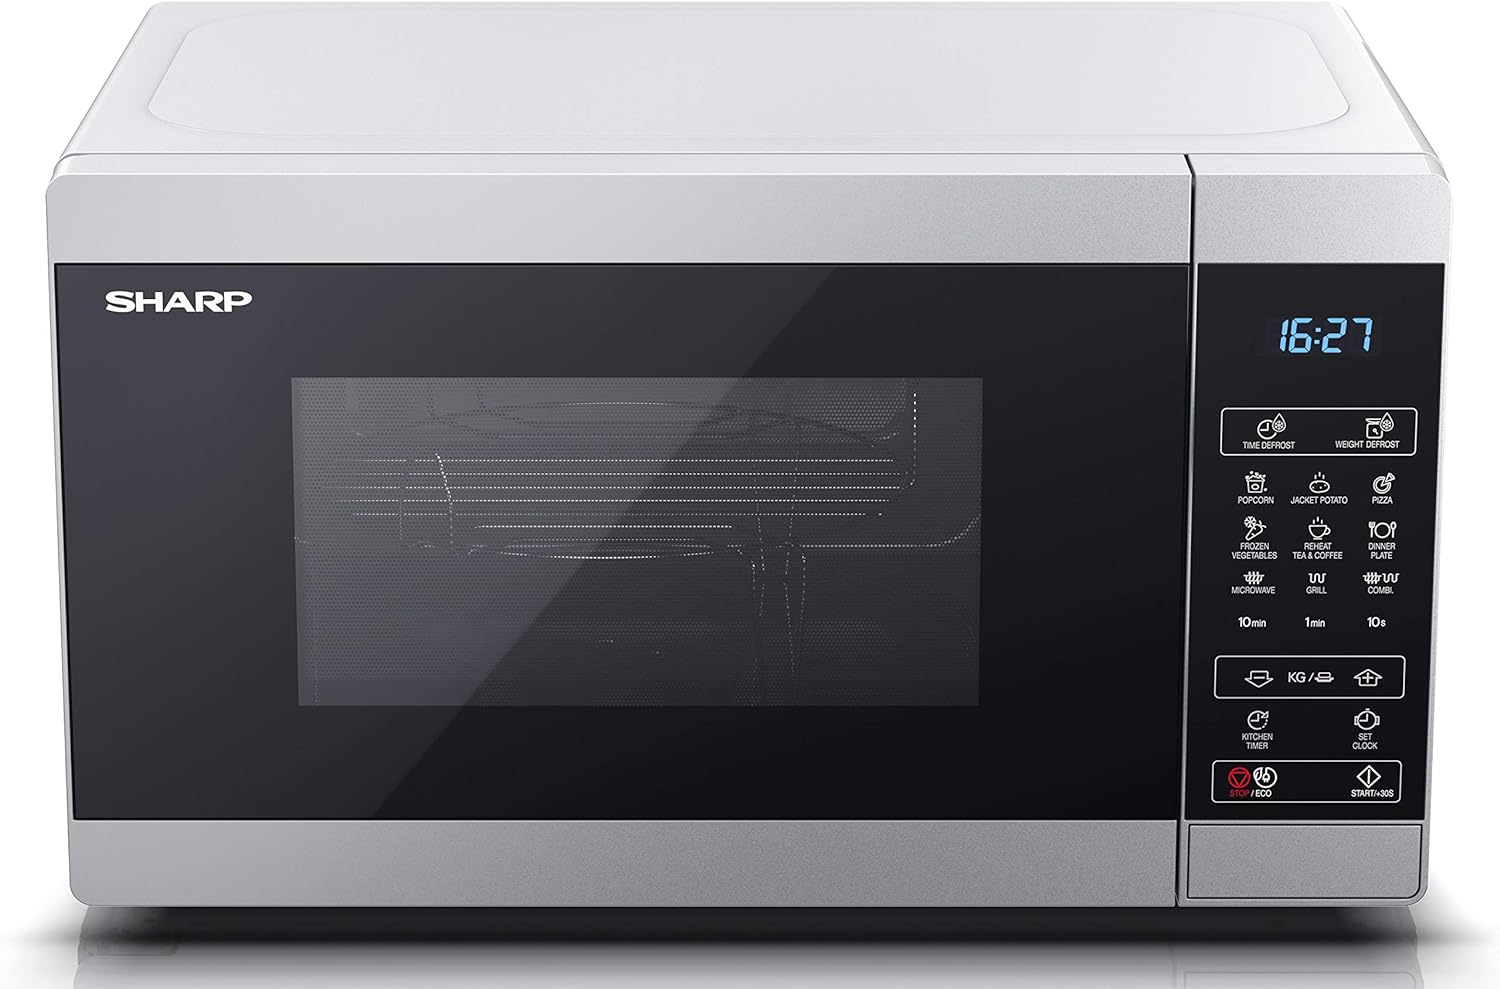 SHARP YC - MG02U - S Compact 20 Litre 800W Digital Microwave with 1000W Grill, 11 power levels, ECO Mode, defrost function, LED cavity light - Silver - Amazing Gadgets Outlet